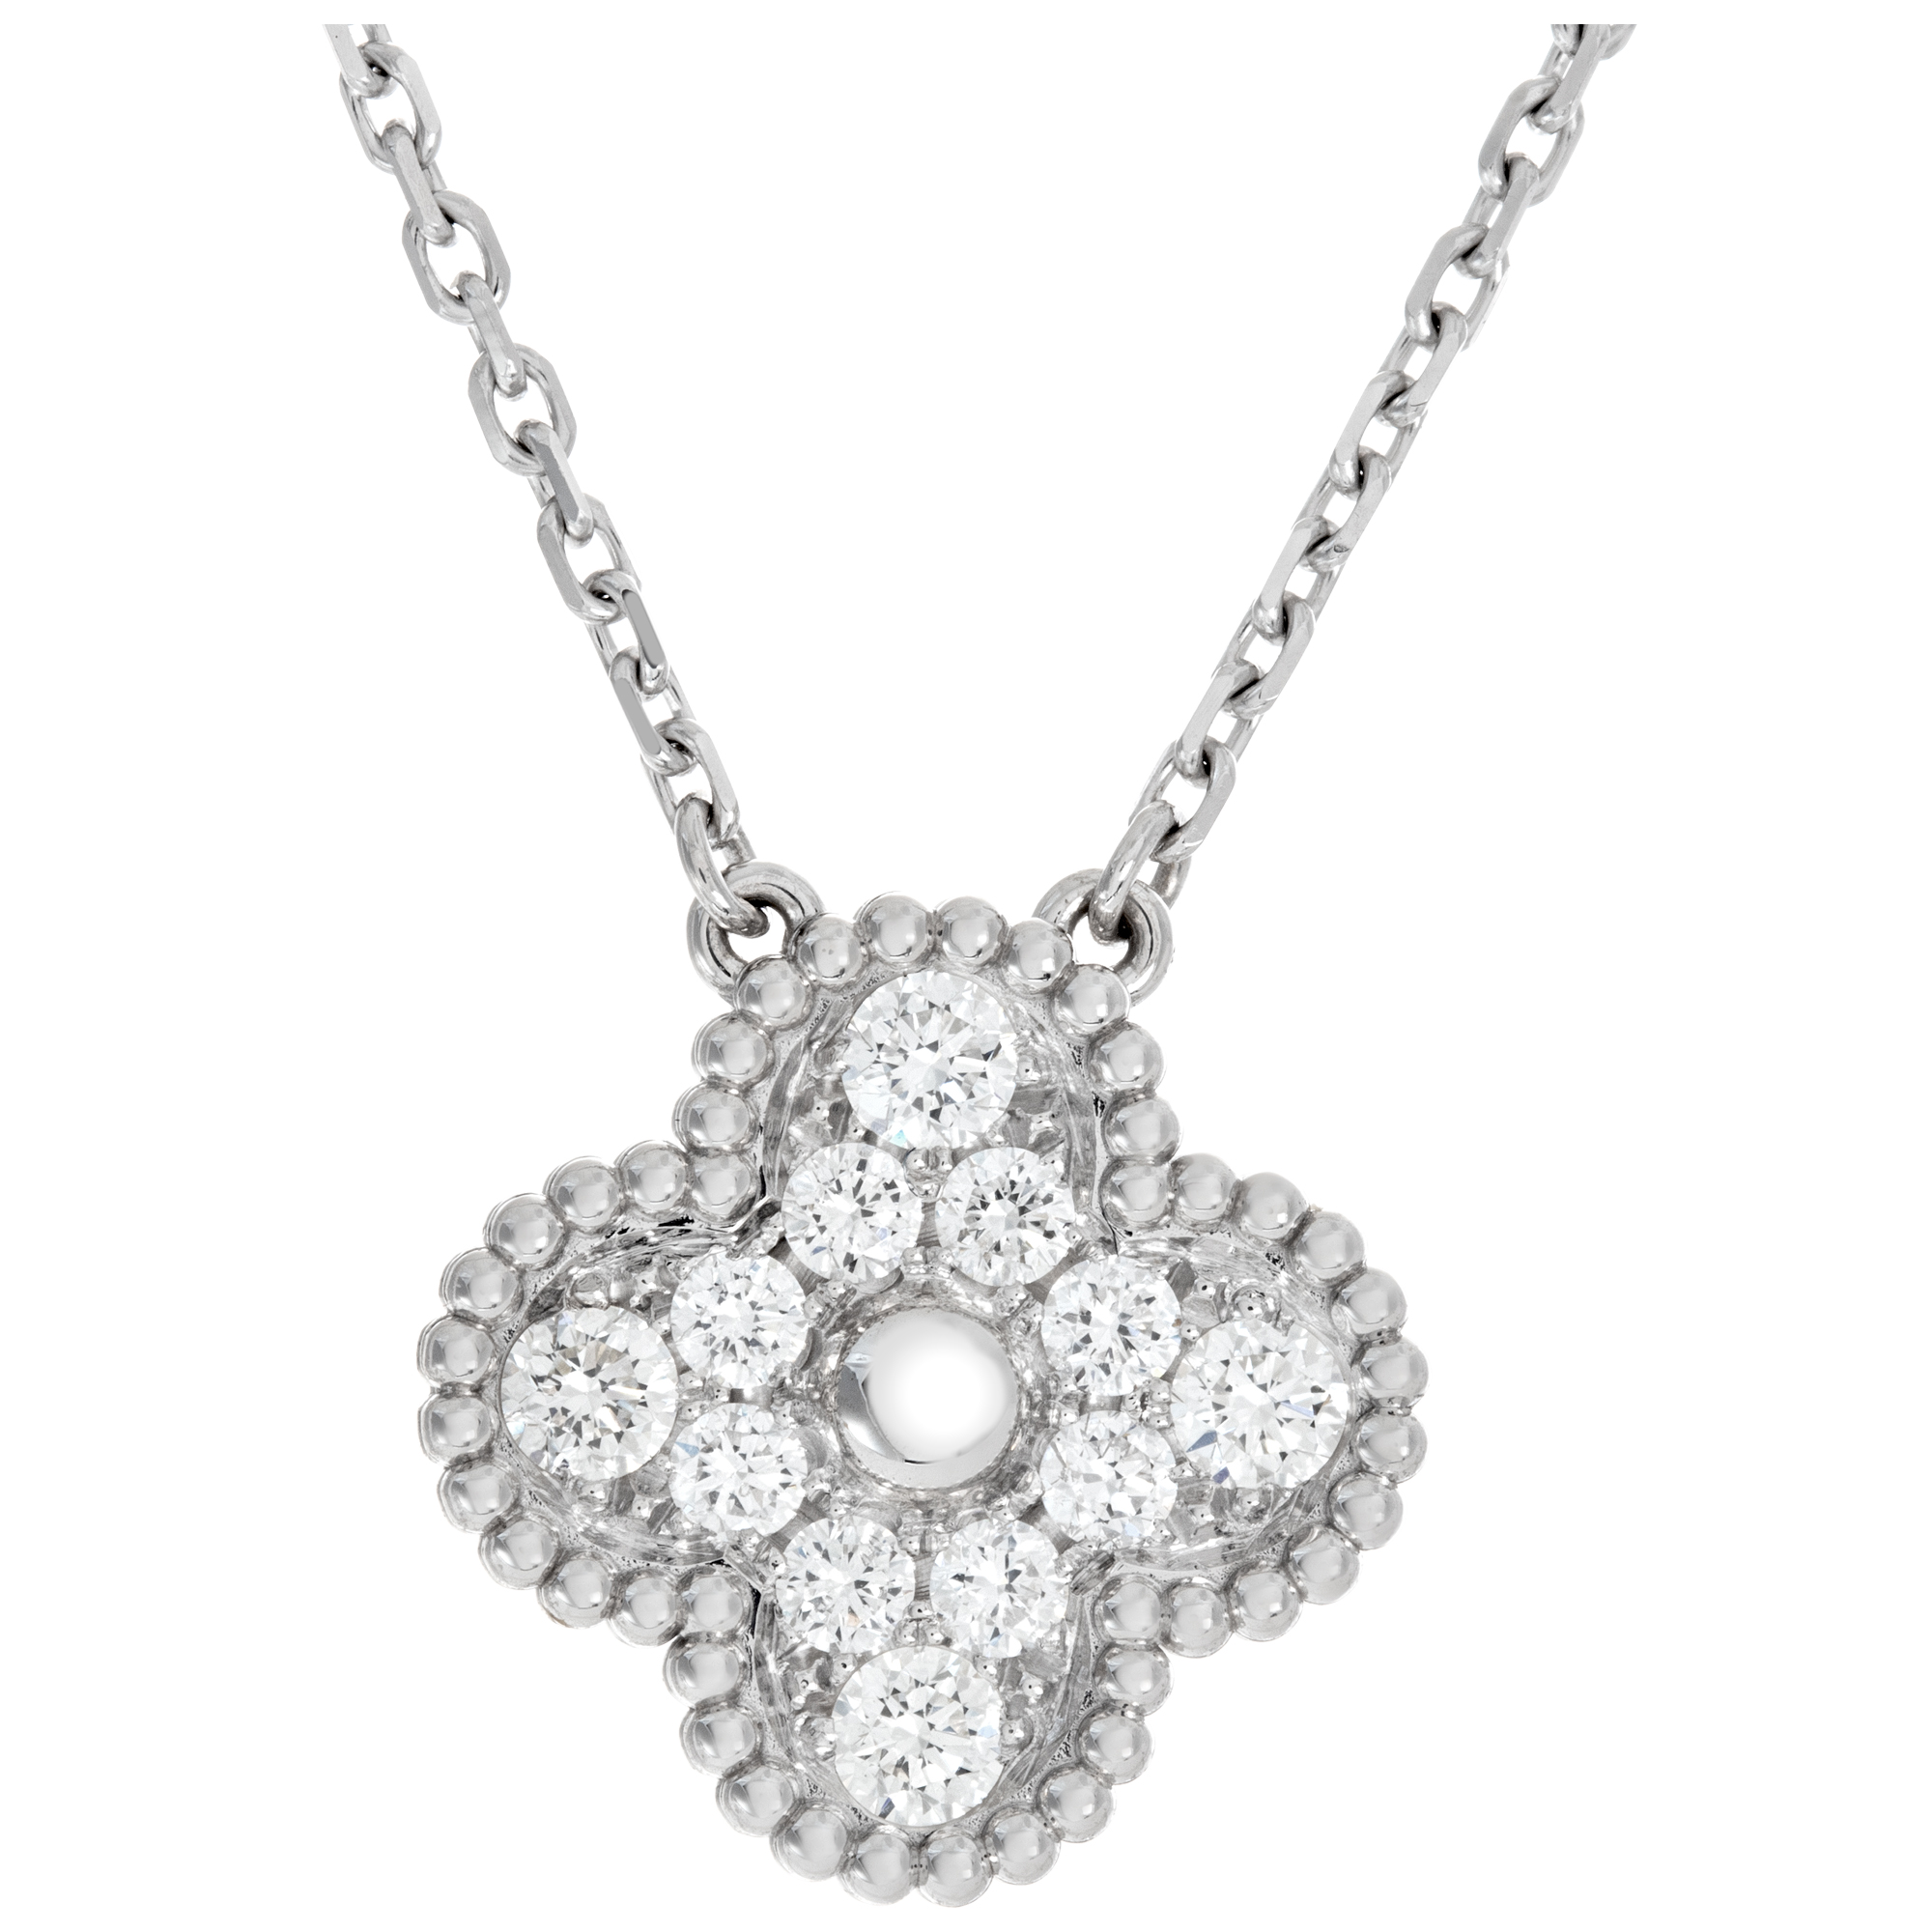 Van Cleef & Arpels Vintage Alhambra pendant necklace in18k white gold with 0.48 ct in diamonds